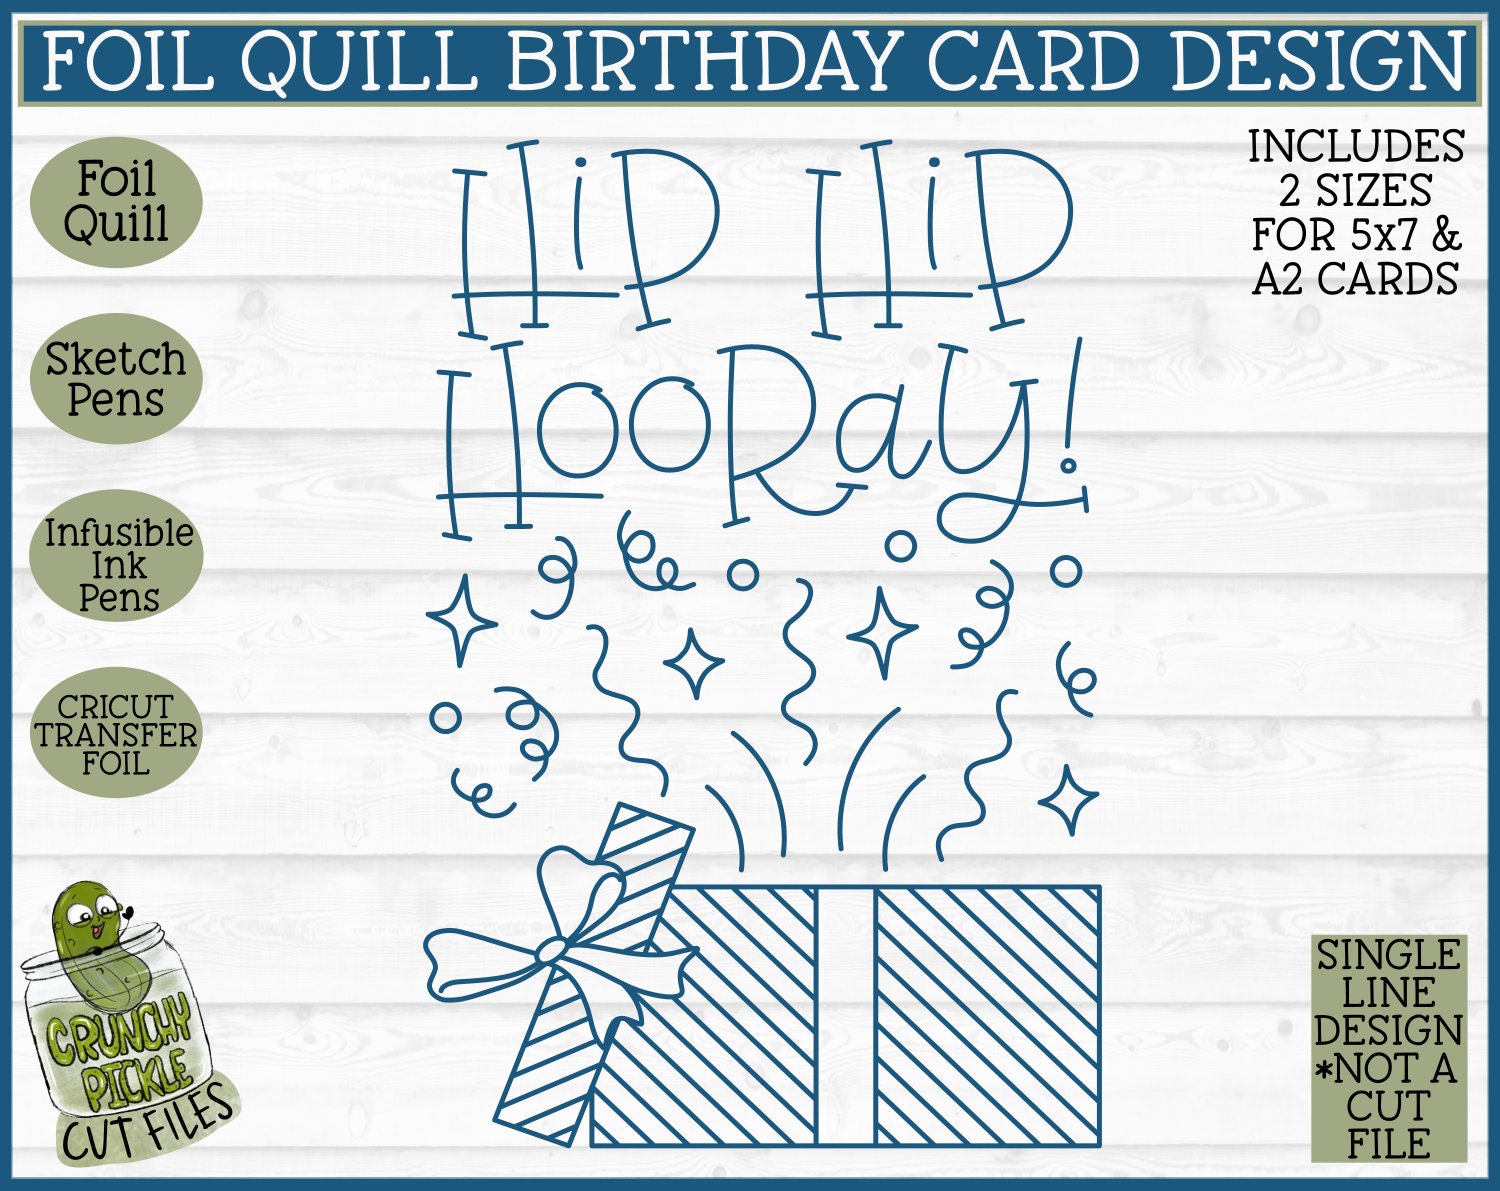 Foil Quill Birthday Card - Gifts / Single Line Sketch SVG File - Crunchy  Pickle SVG Cut Files